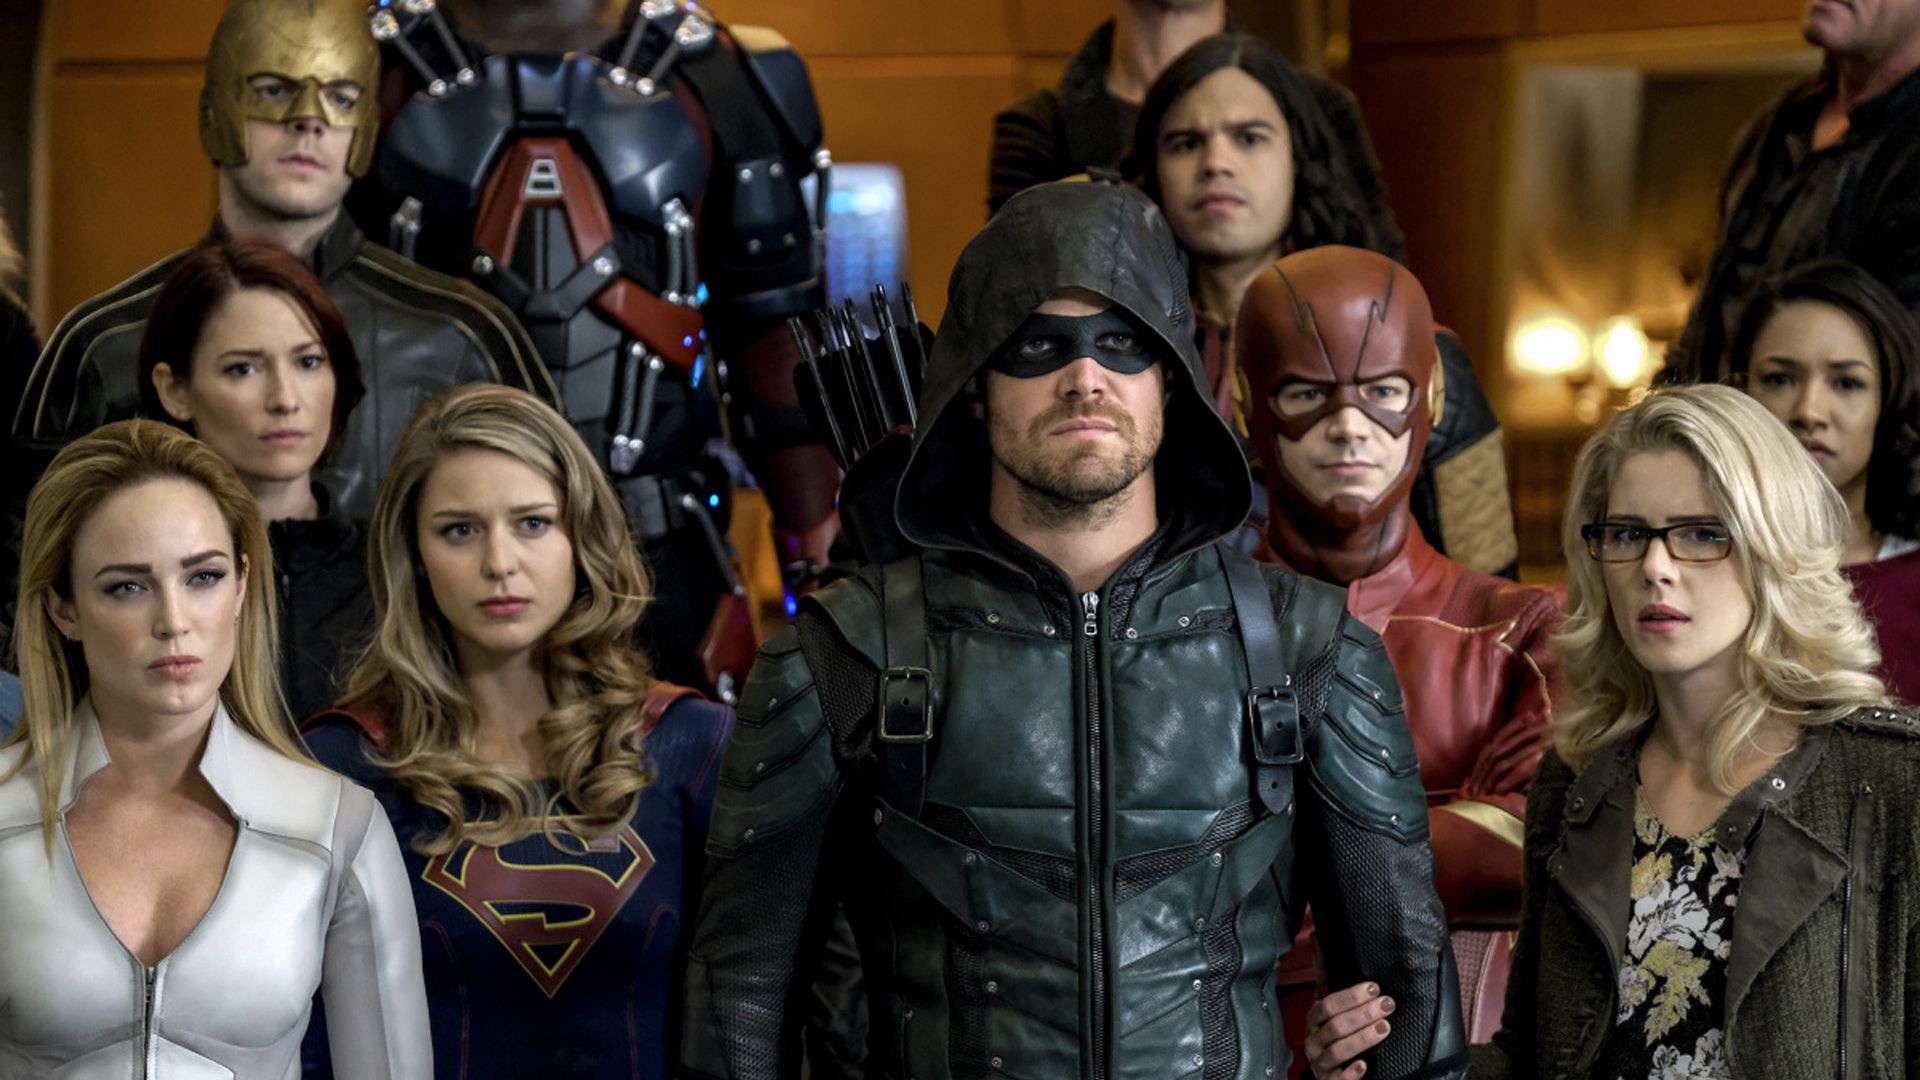 Wallpaper Supergirl, arrow, the flash, and legends of tomorrow, crossover, tv series